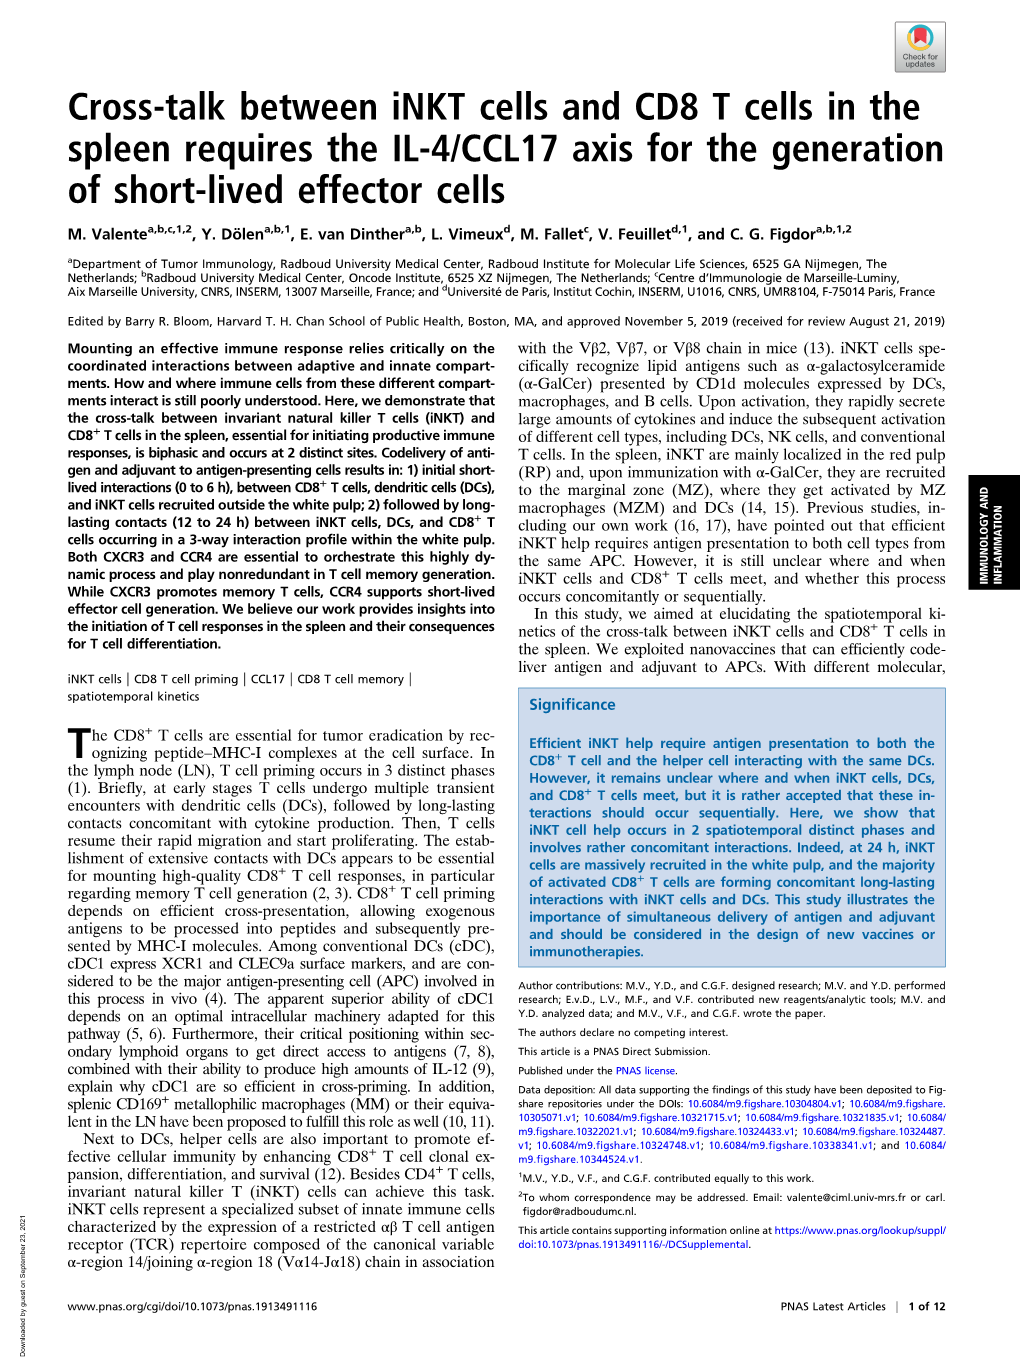 Cross-Talk Between Inkt Cells and CD8 T Cells in the Spleen Requires the IL-4/CCL17 Axis for the Generation of Short-Lived Effector Cells